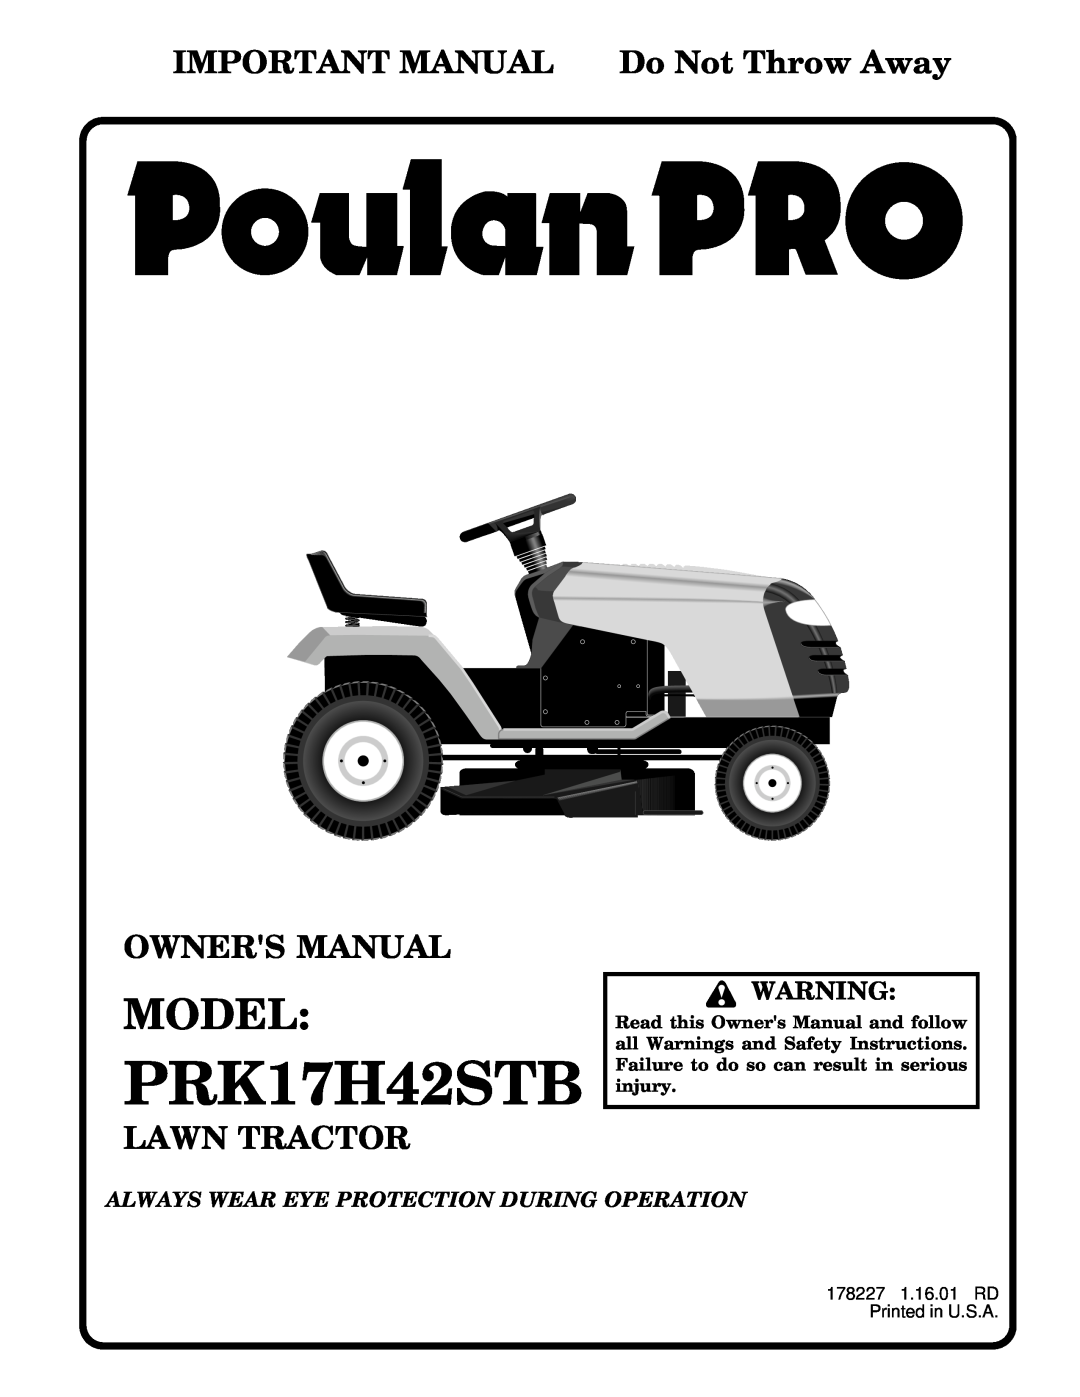 Poulan PRK17H42STB owner manual Model, IMPORTANT MANUAL Do Not Throw Away, Owners Manual, Lawn Tractor 